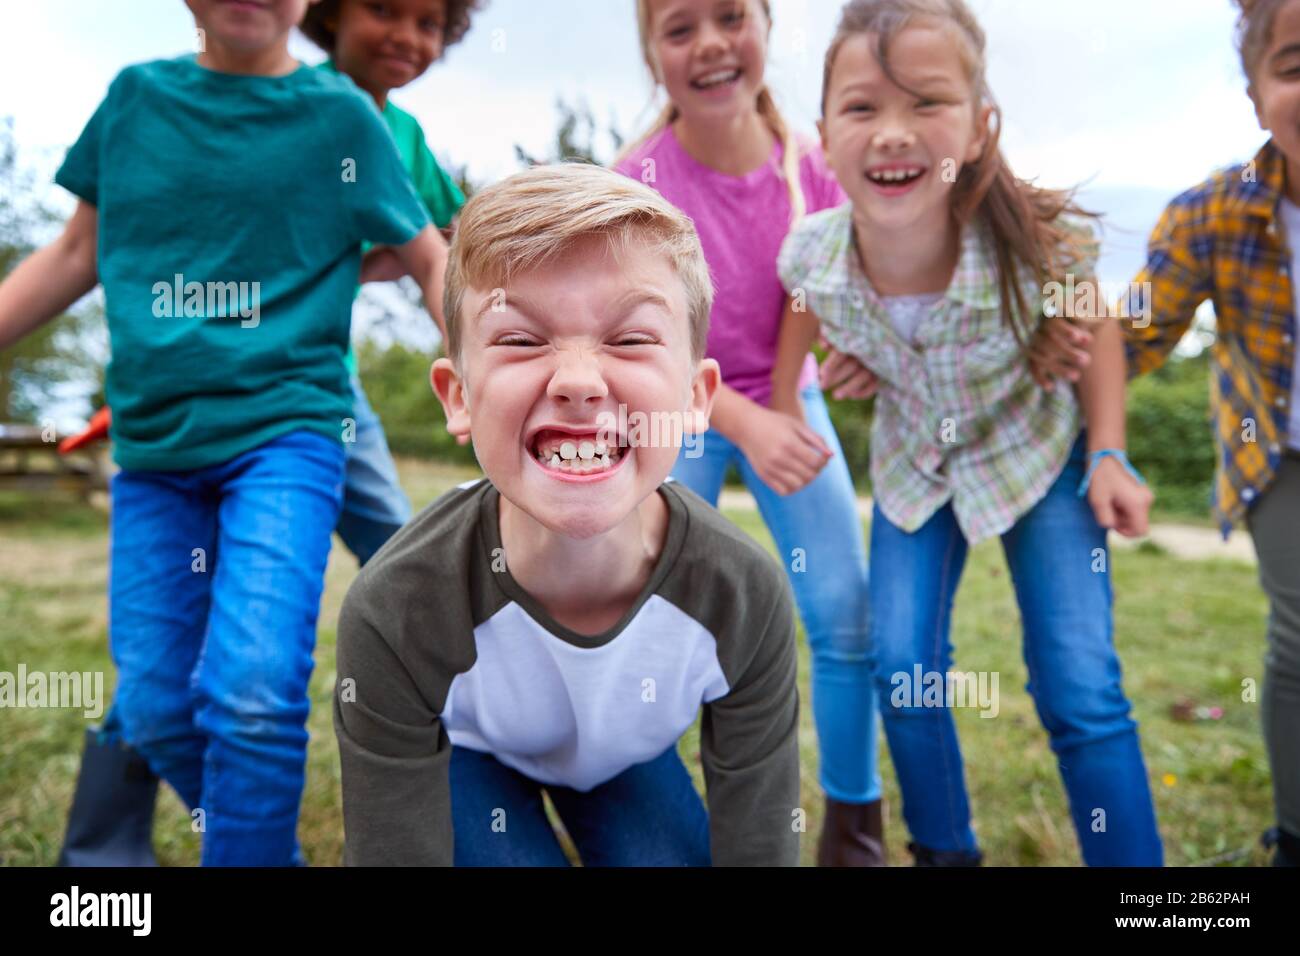 Portrait Of Children On Outdoor Activity Camping Trip Pulling Faces Having Fun Playing Game Together Stock Photo